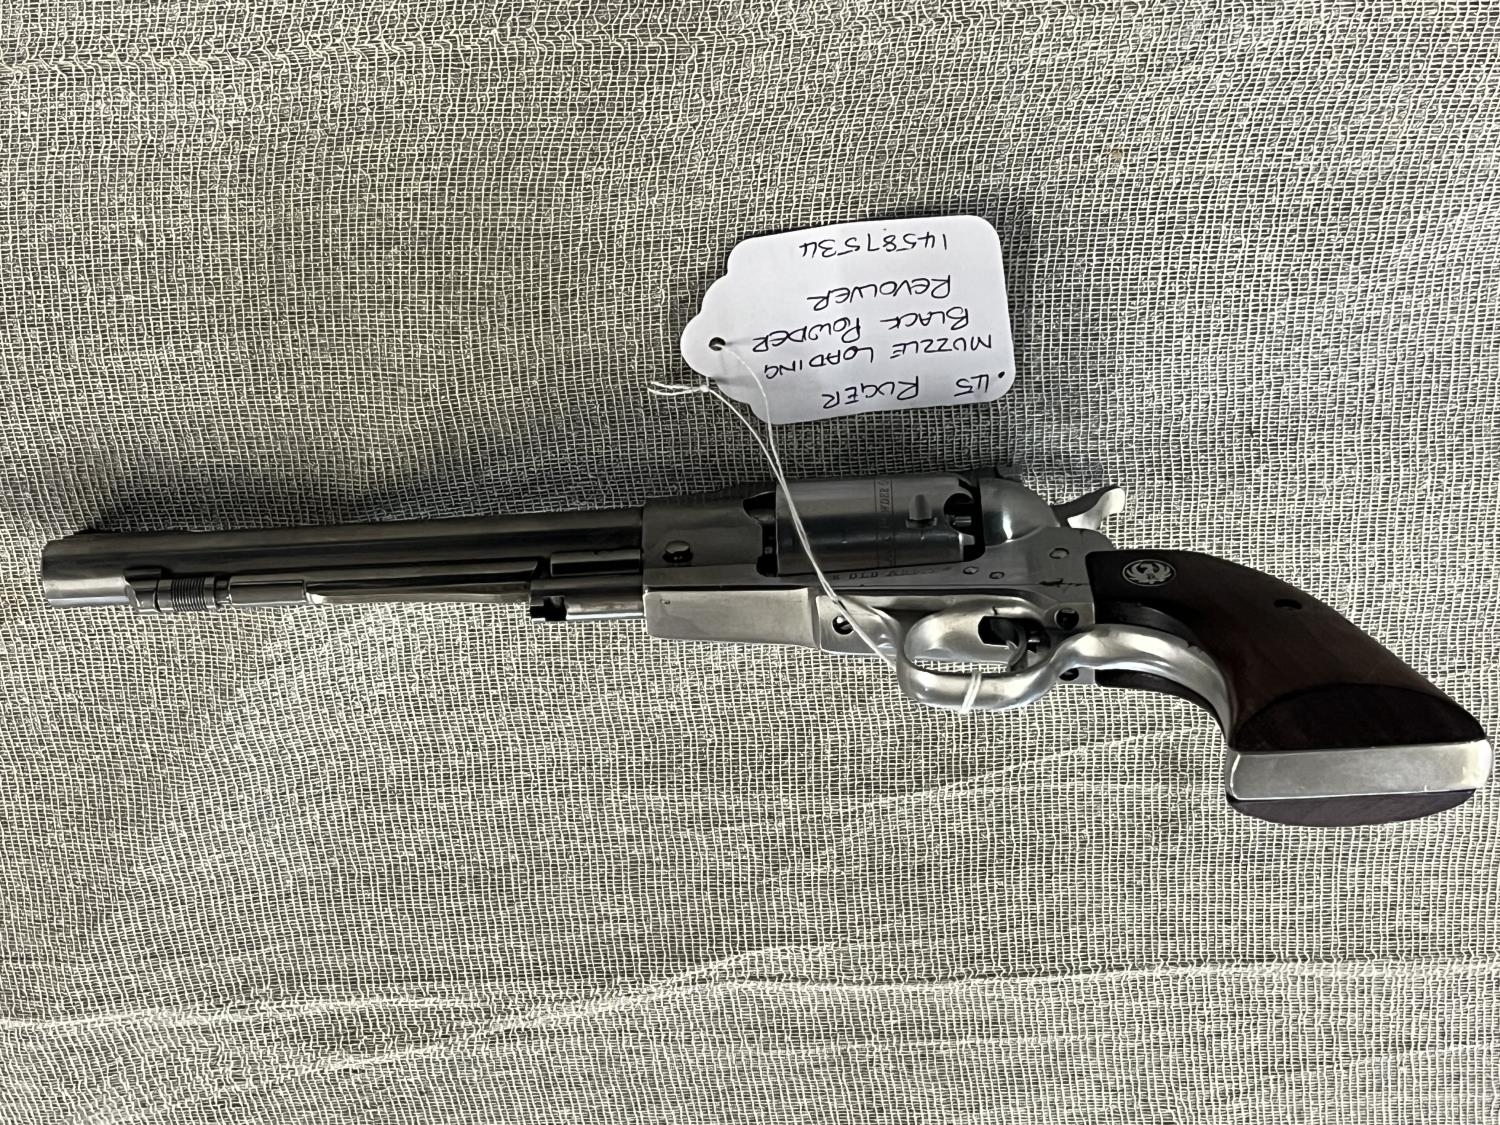 A Strum Ruger & Co "Old Army" muzzle loading .45 calibre revolver. 14587534. Current Firearm - Image 5 of 5